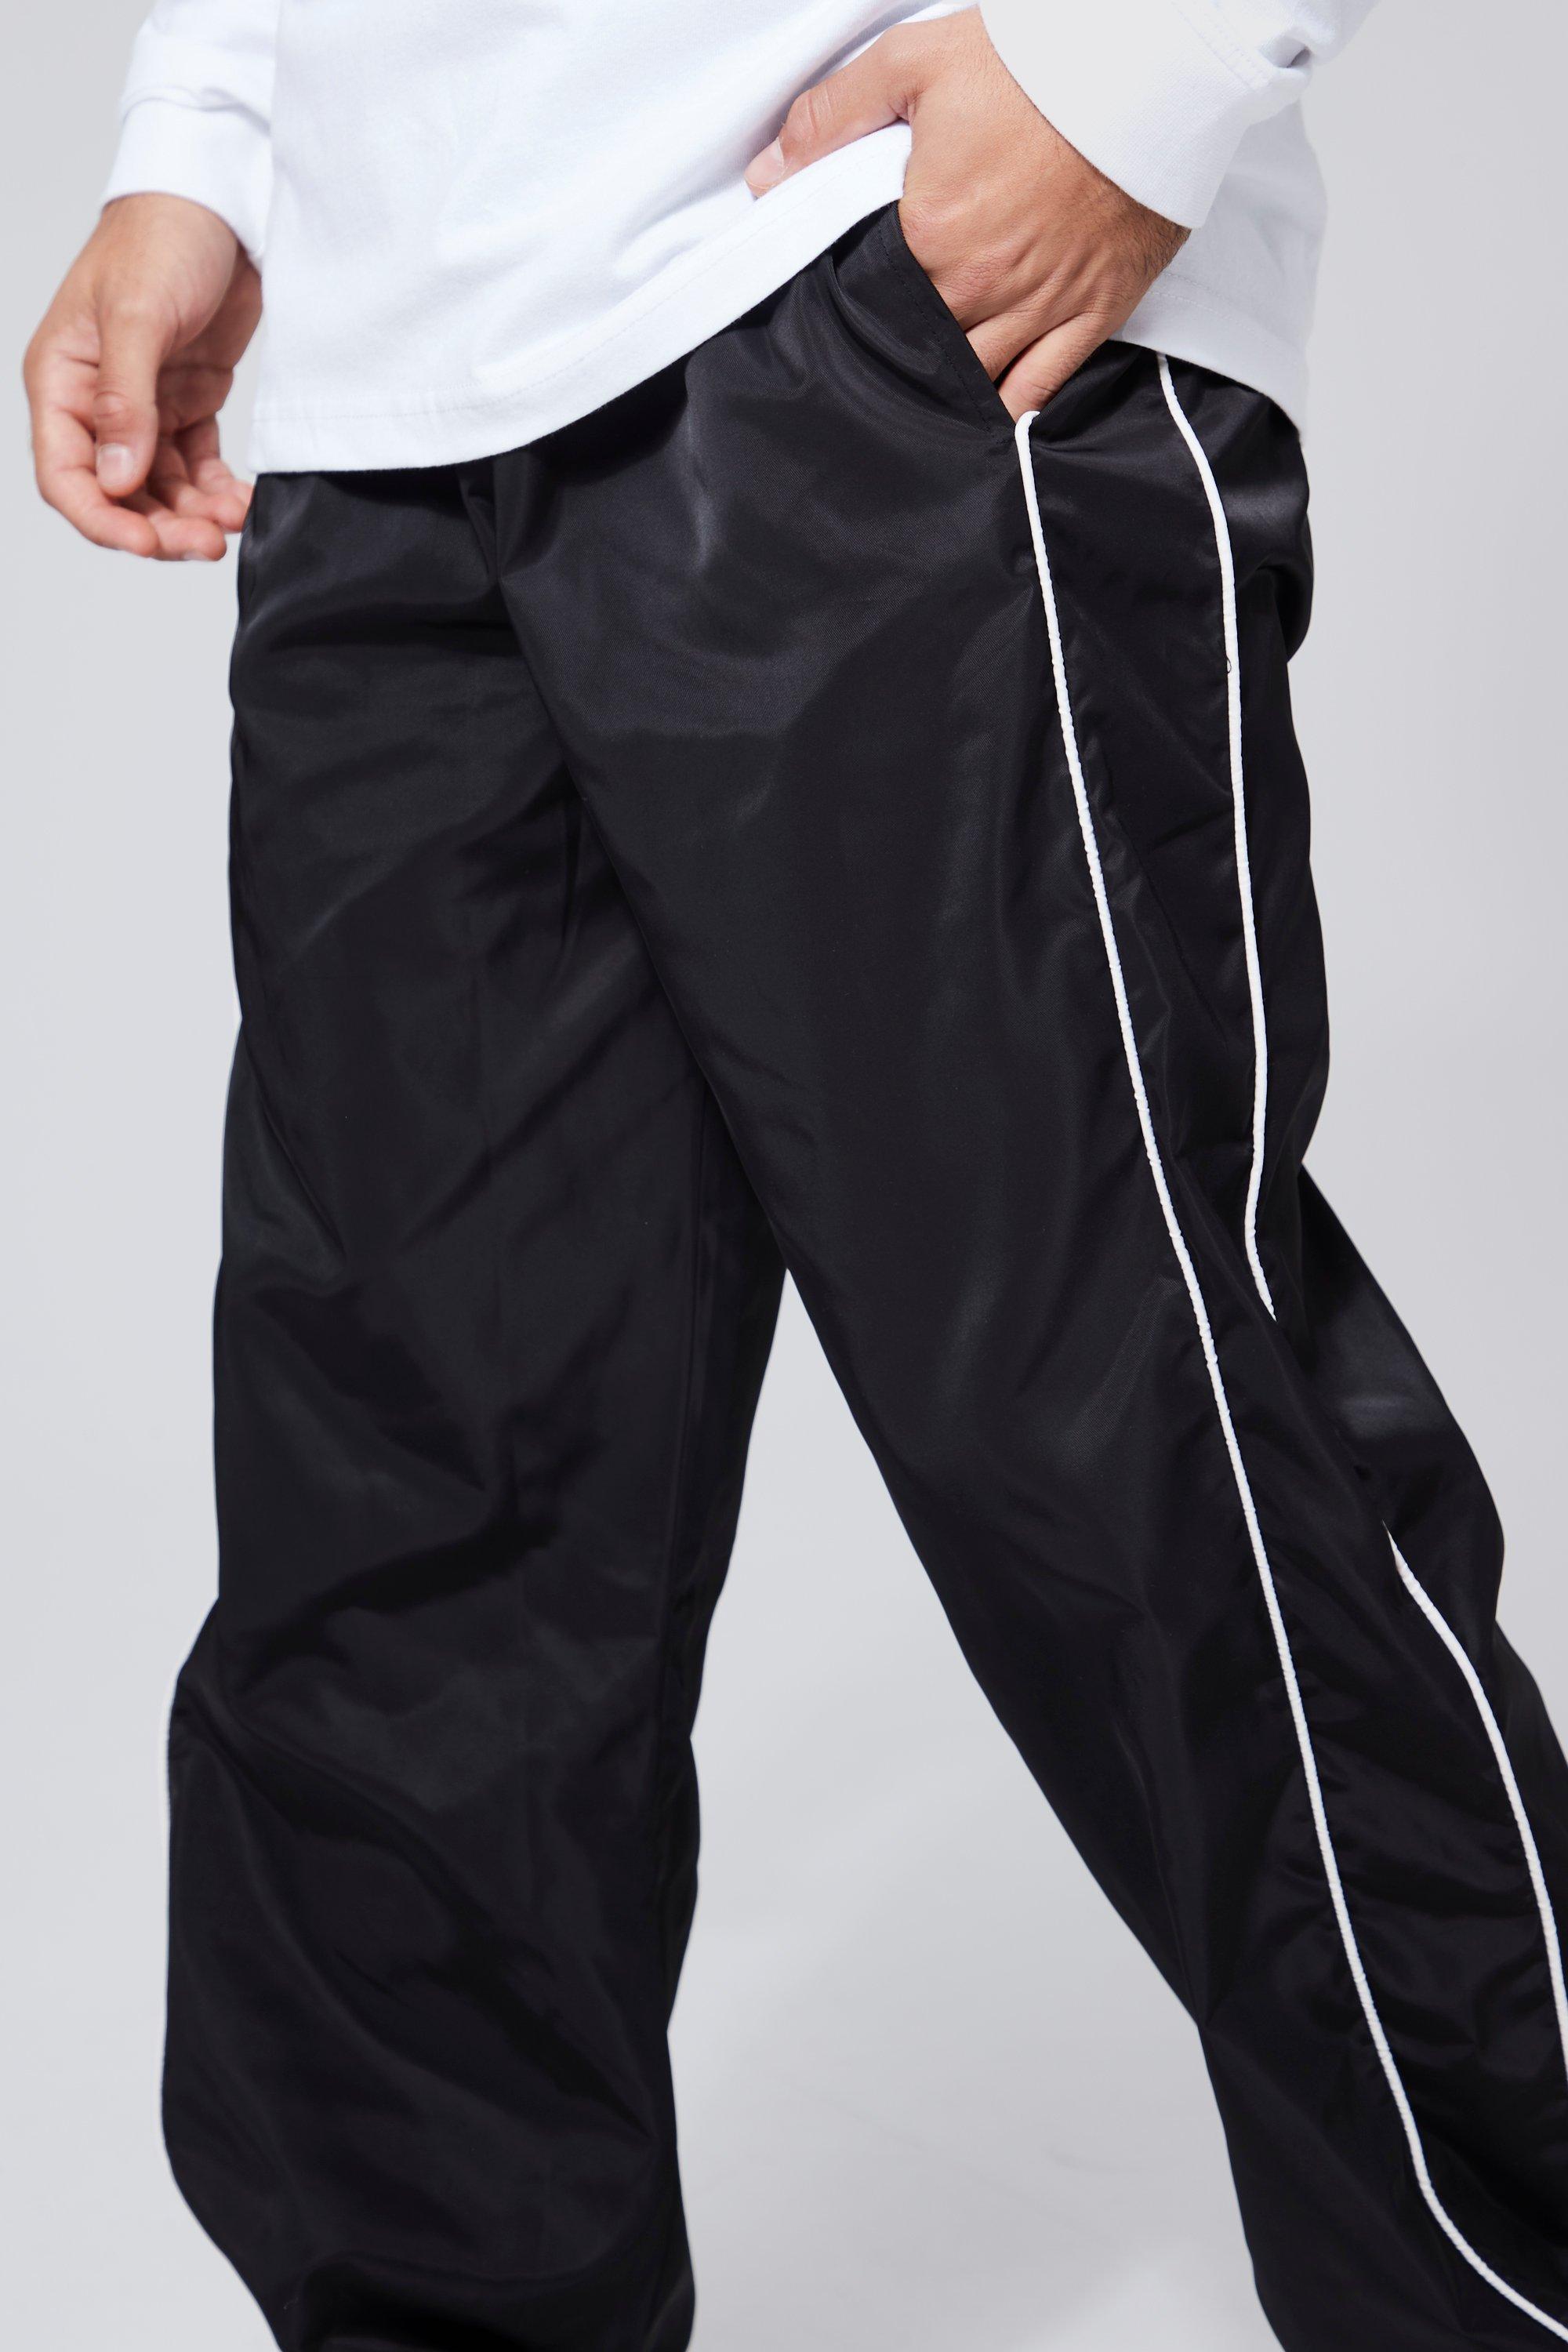 Travel Side Piping Elastic Waistband Trousers